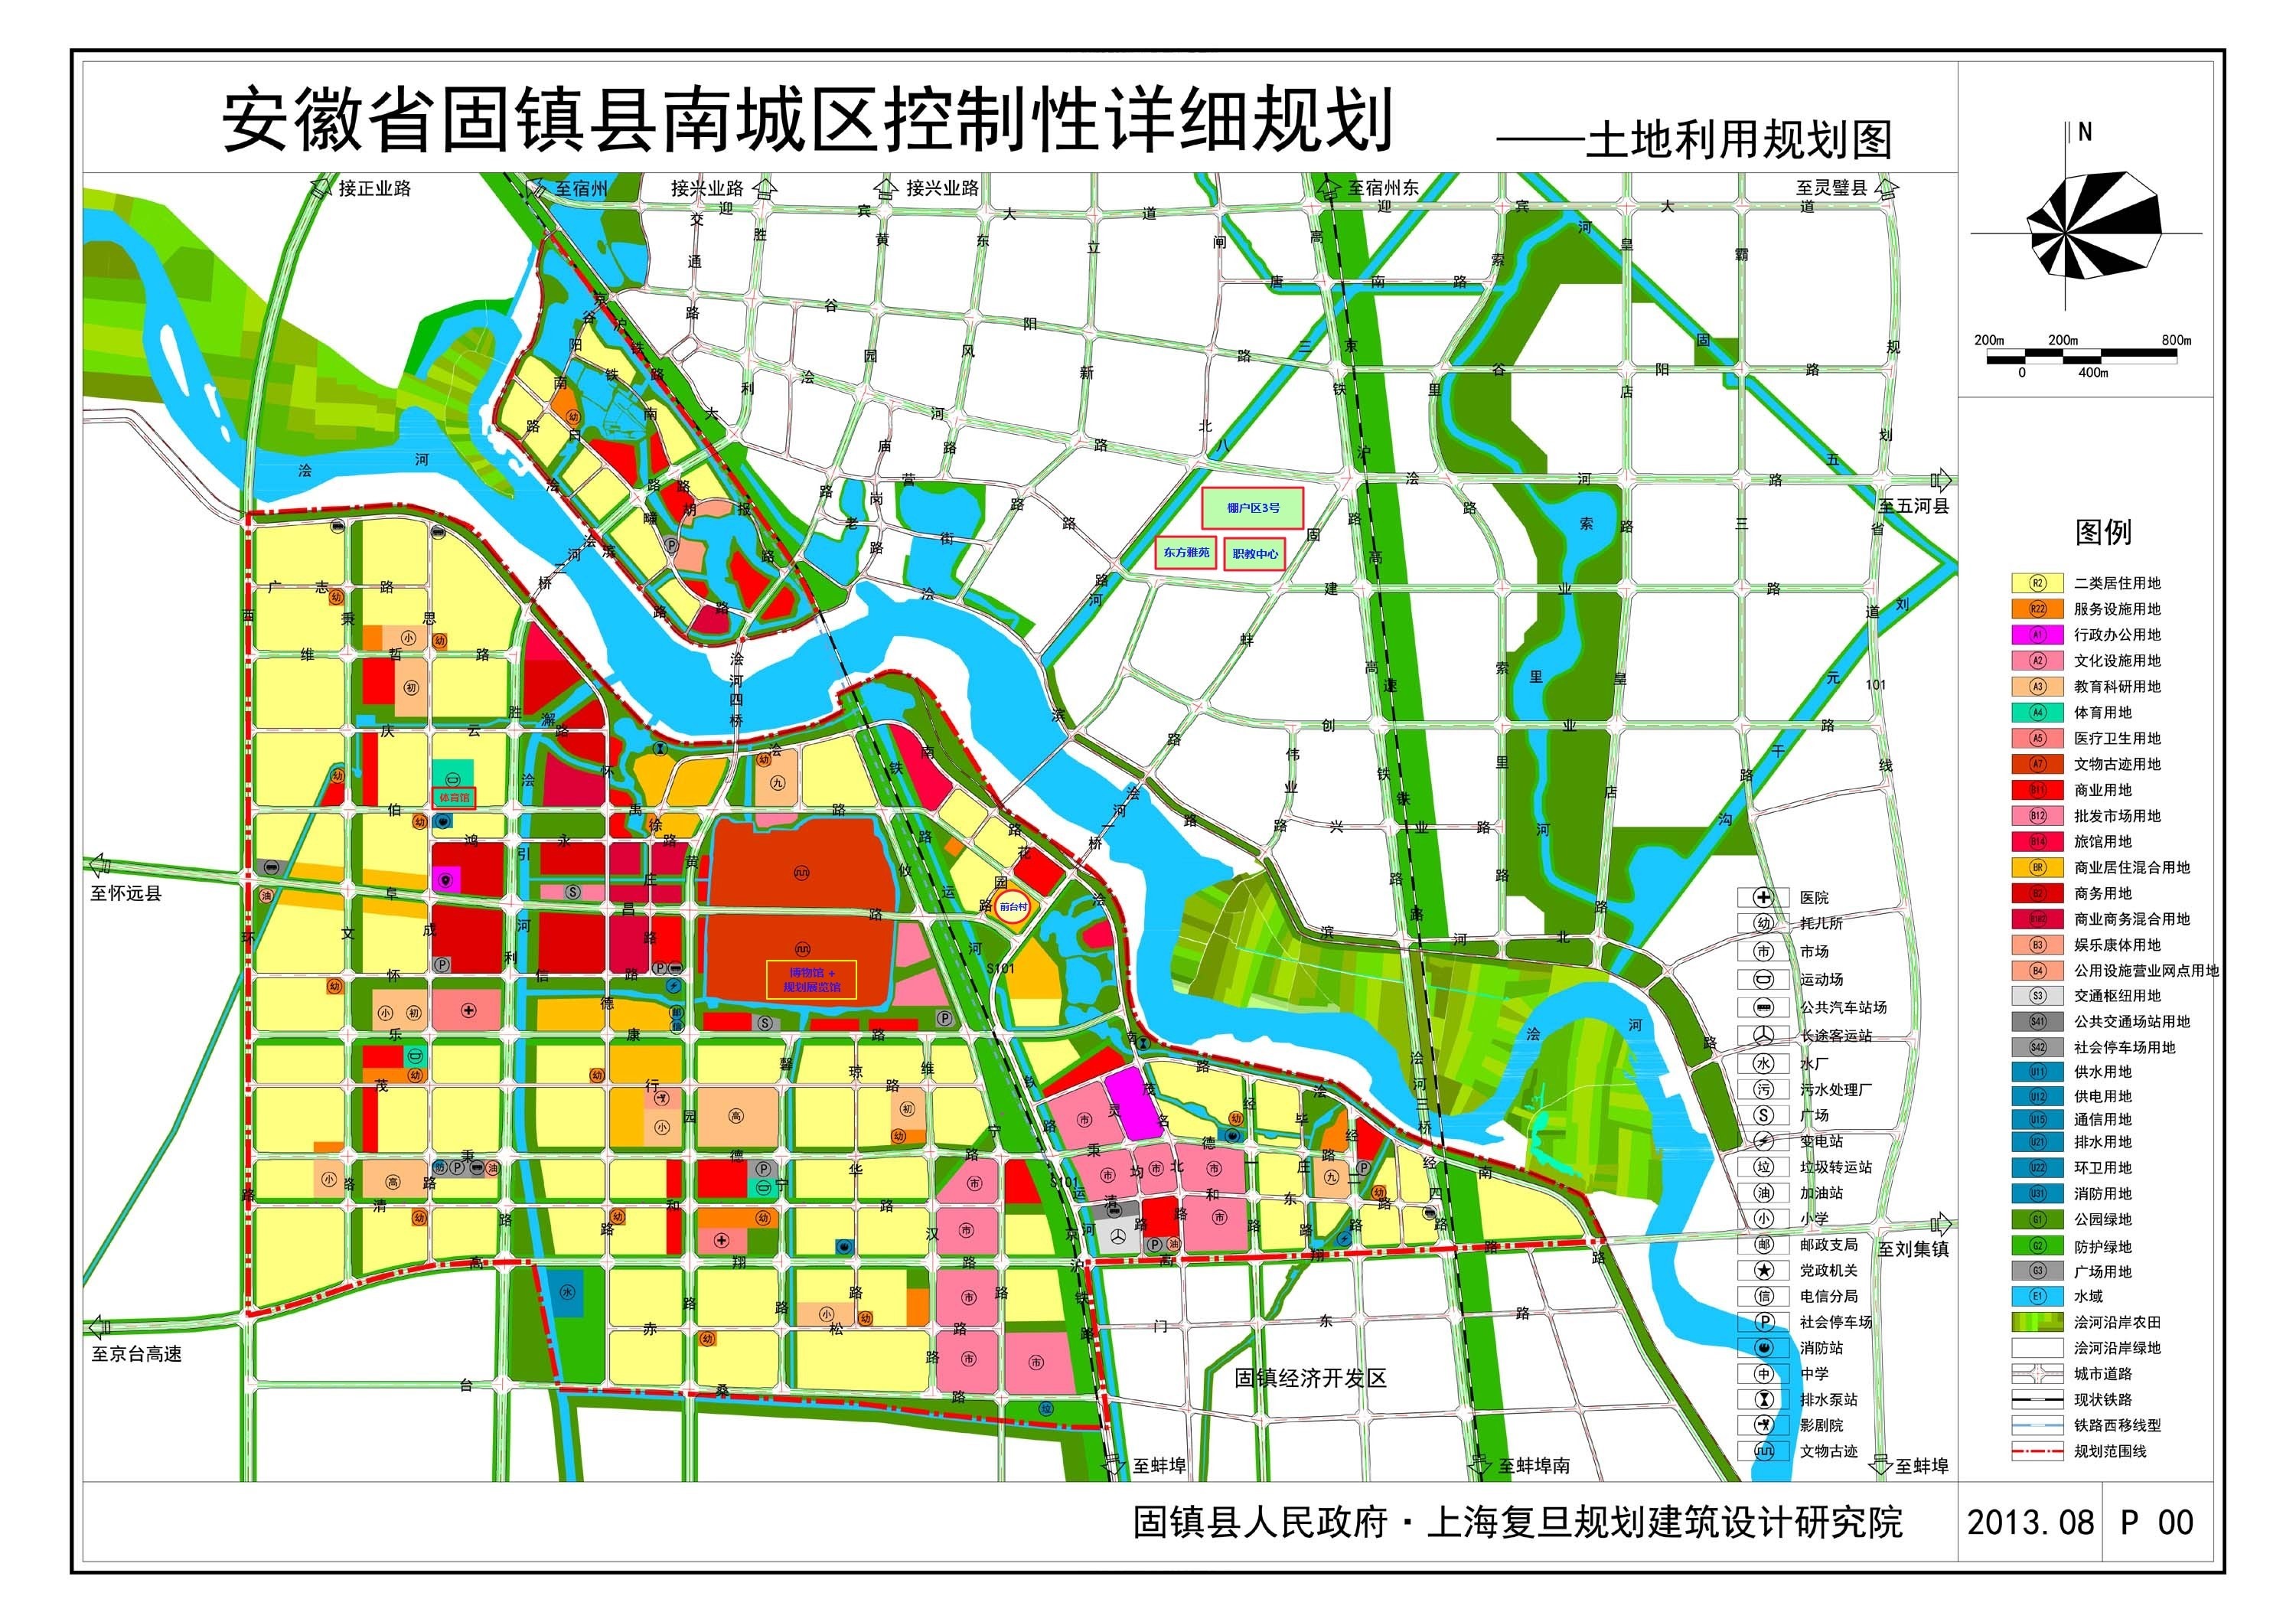 anhui guzhen south district control detail planning map huge version added explanation